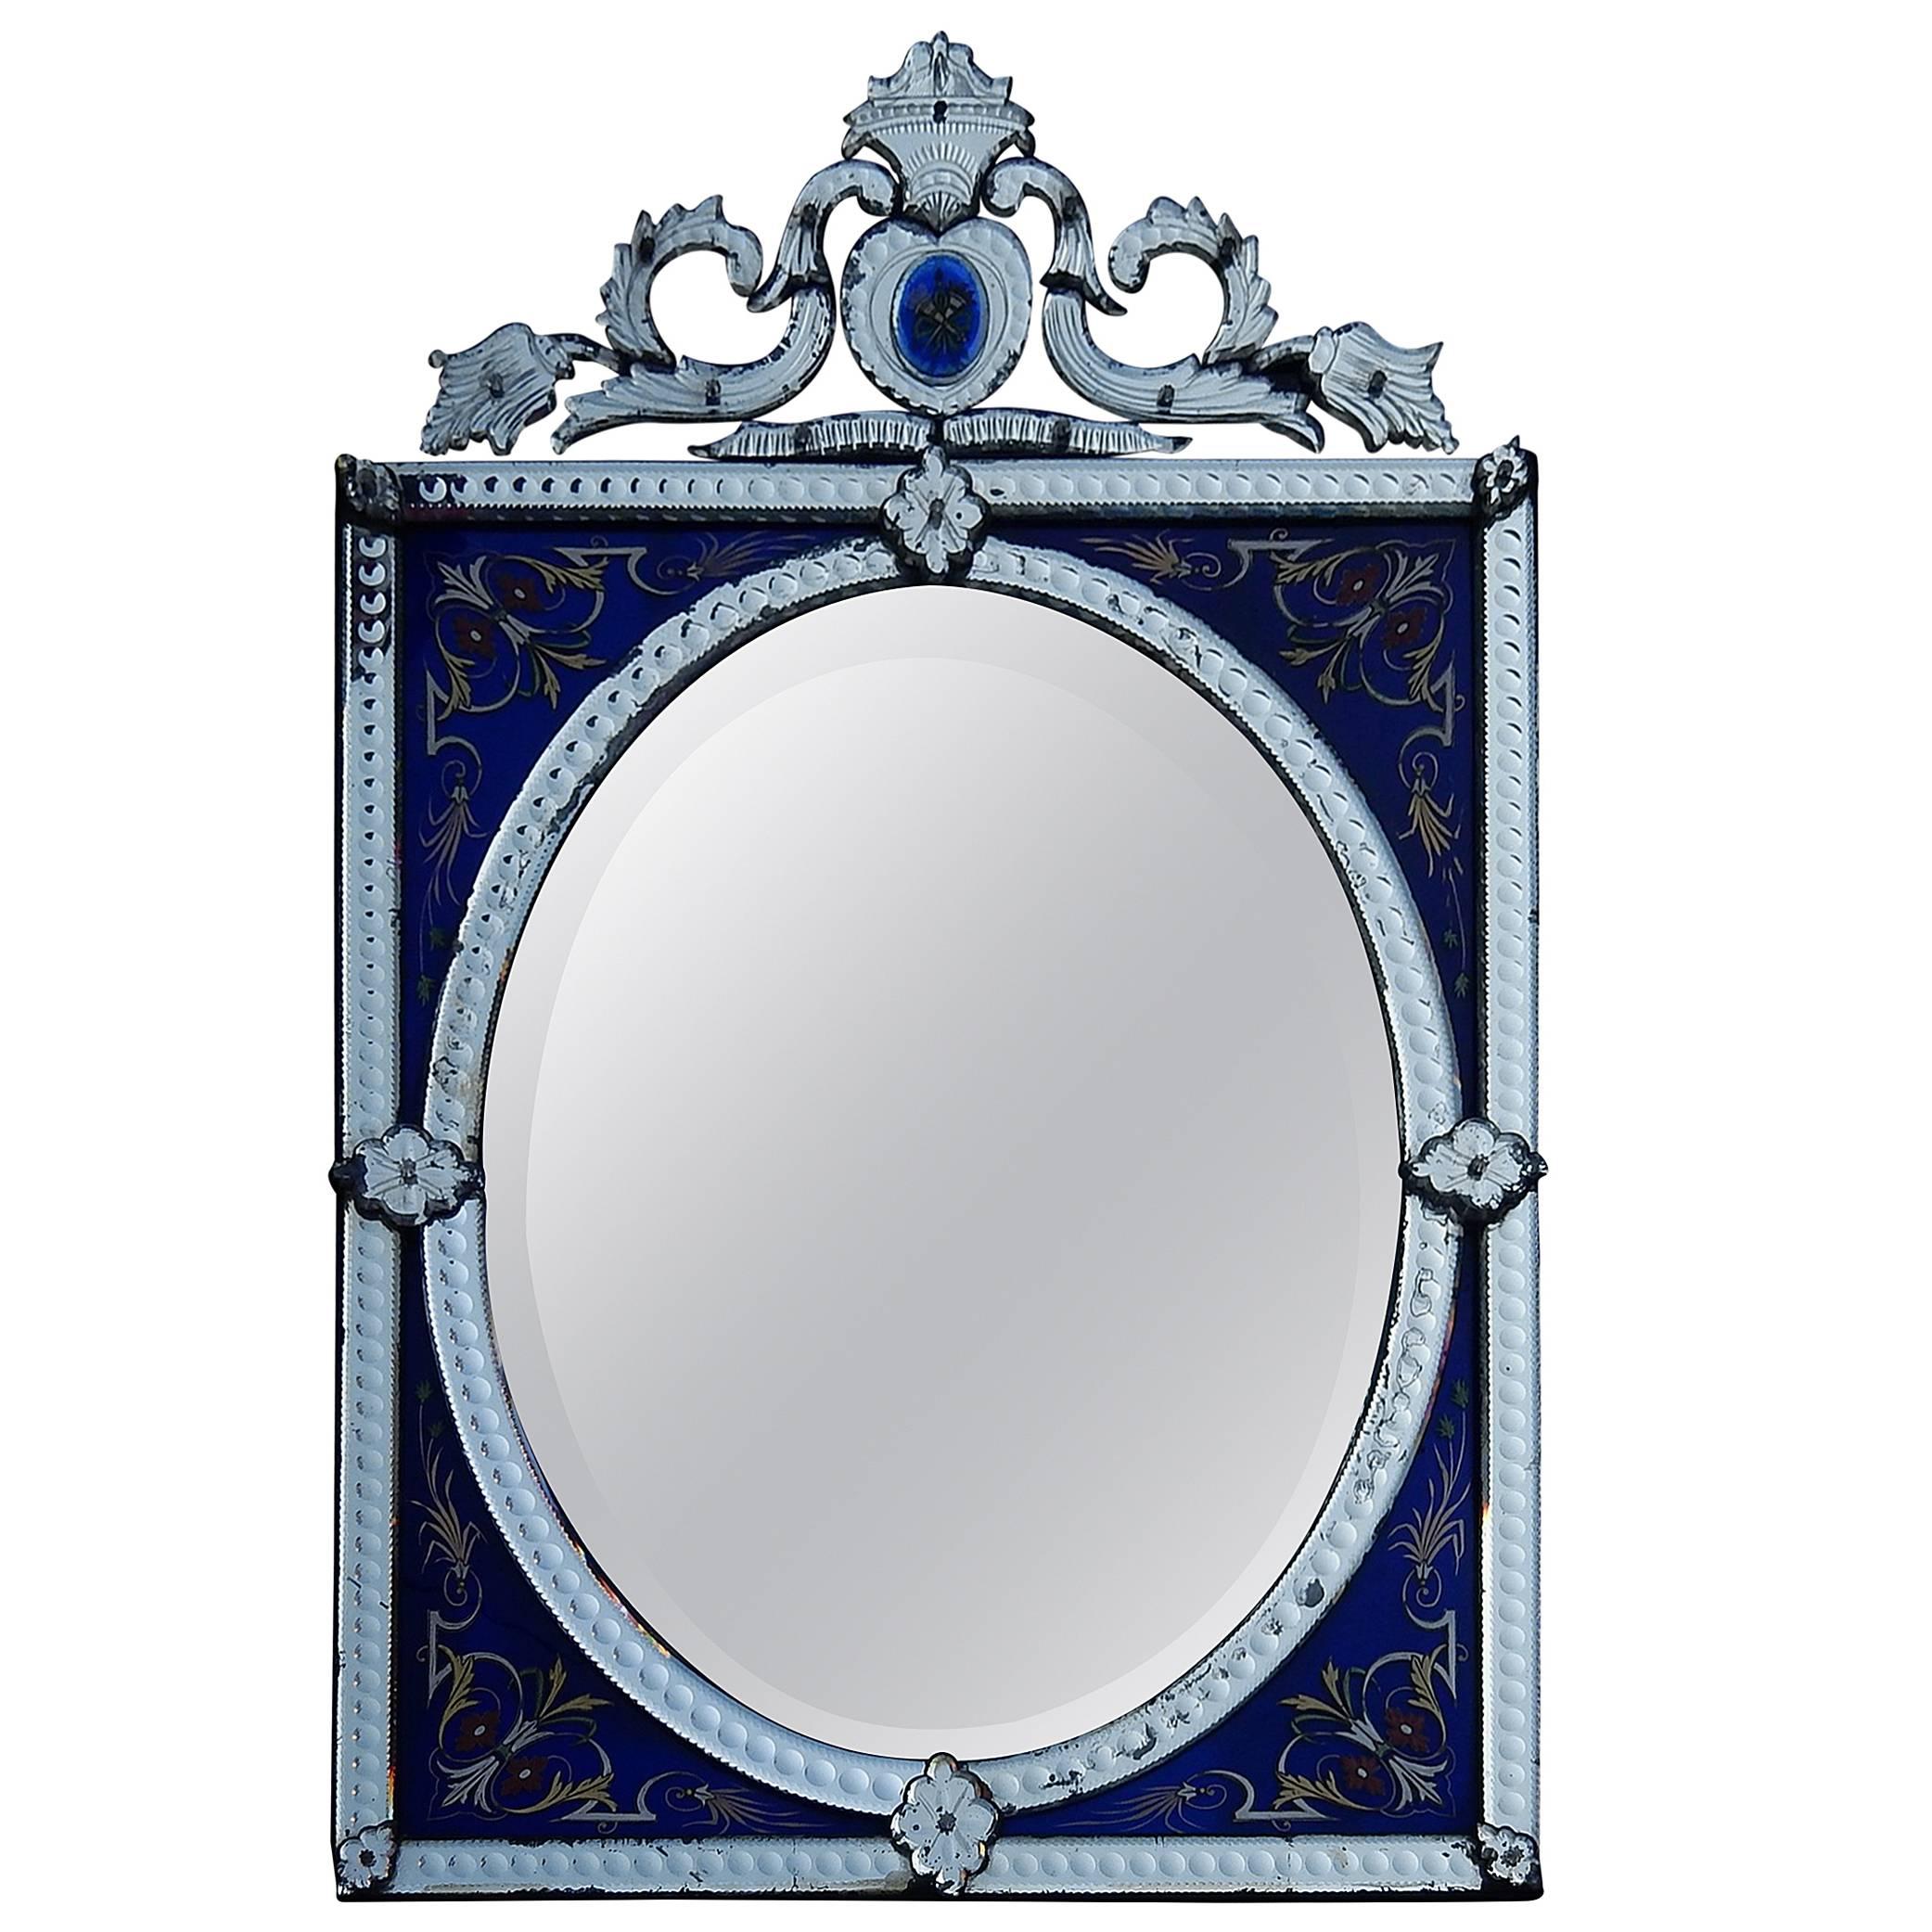 1880-1900 Venetian Mirror with Pediment Blue Glass Adorned with Flowers For Sale